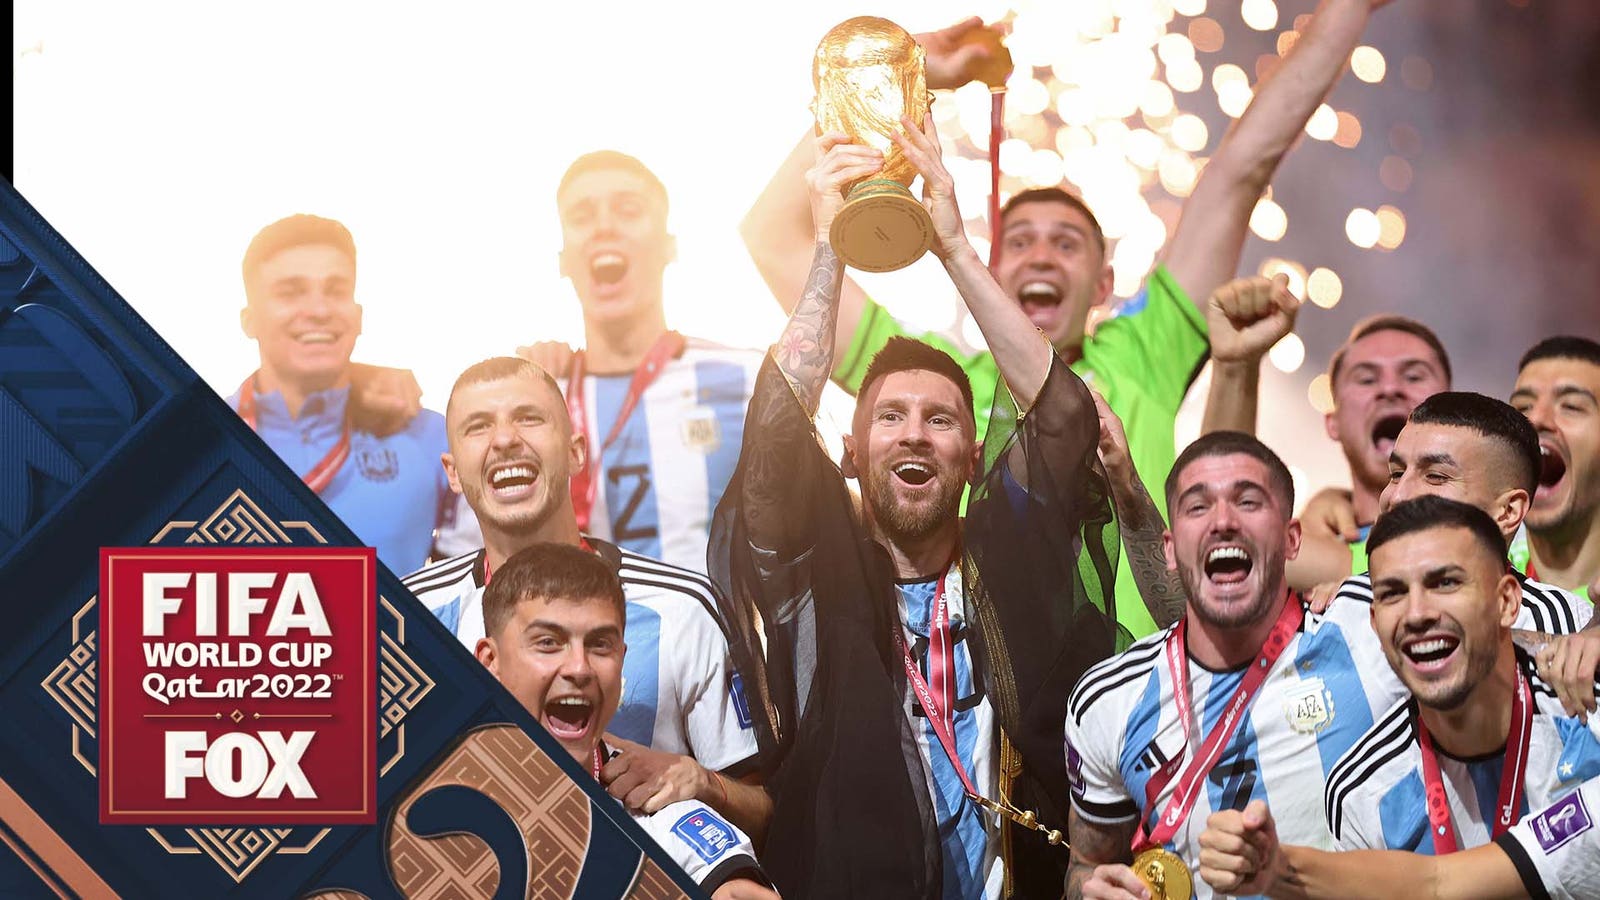 Lionel Messi hoists trophy after Argentina wins the 2022 FIFA World Cup 